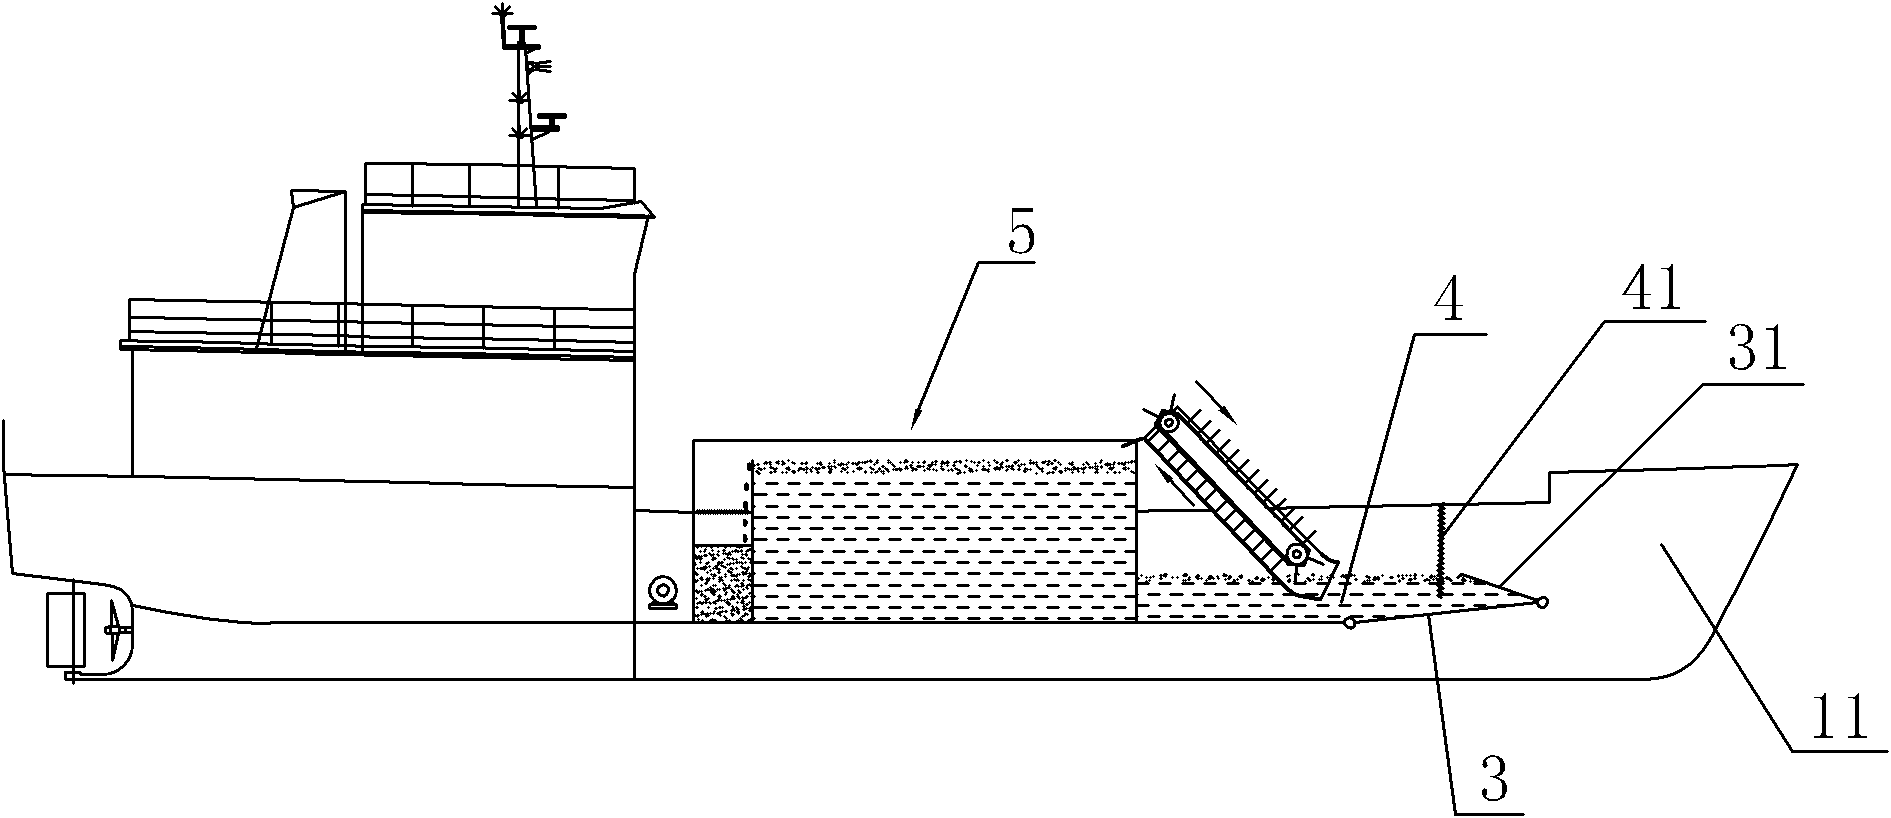 Water surface floating oil recovery ship